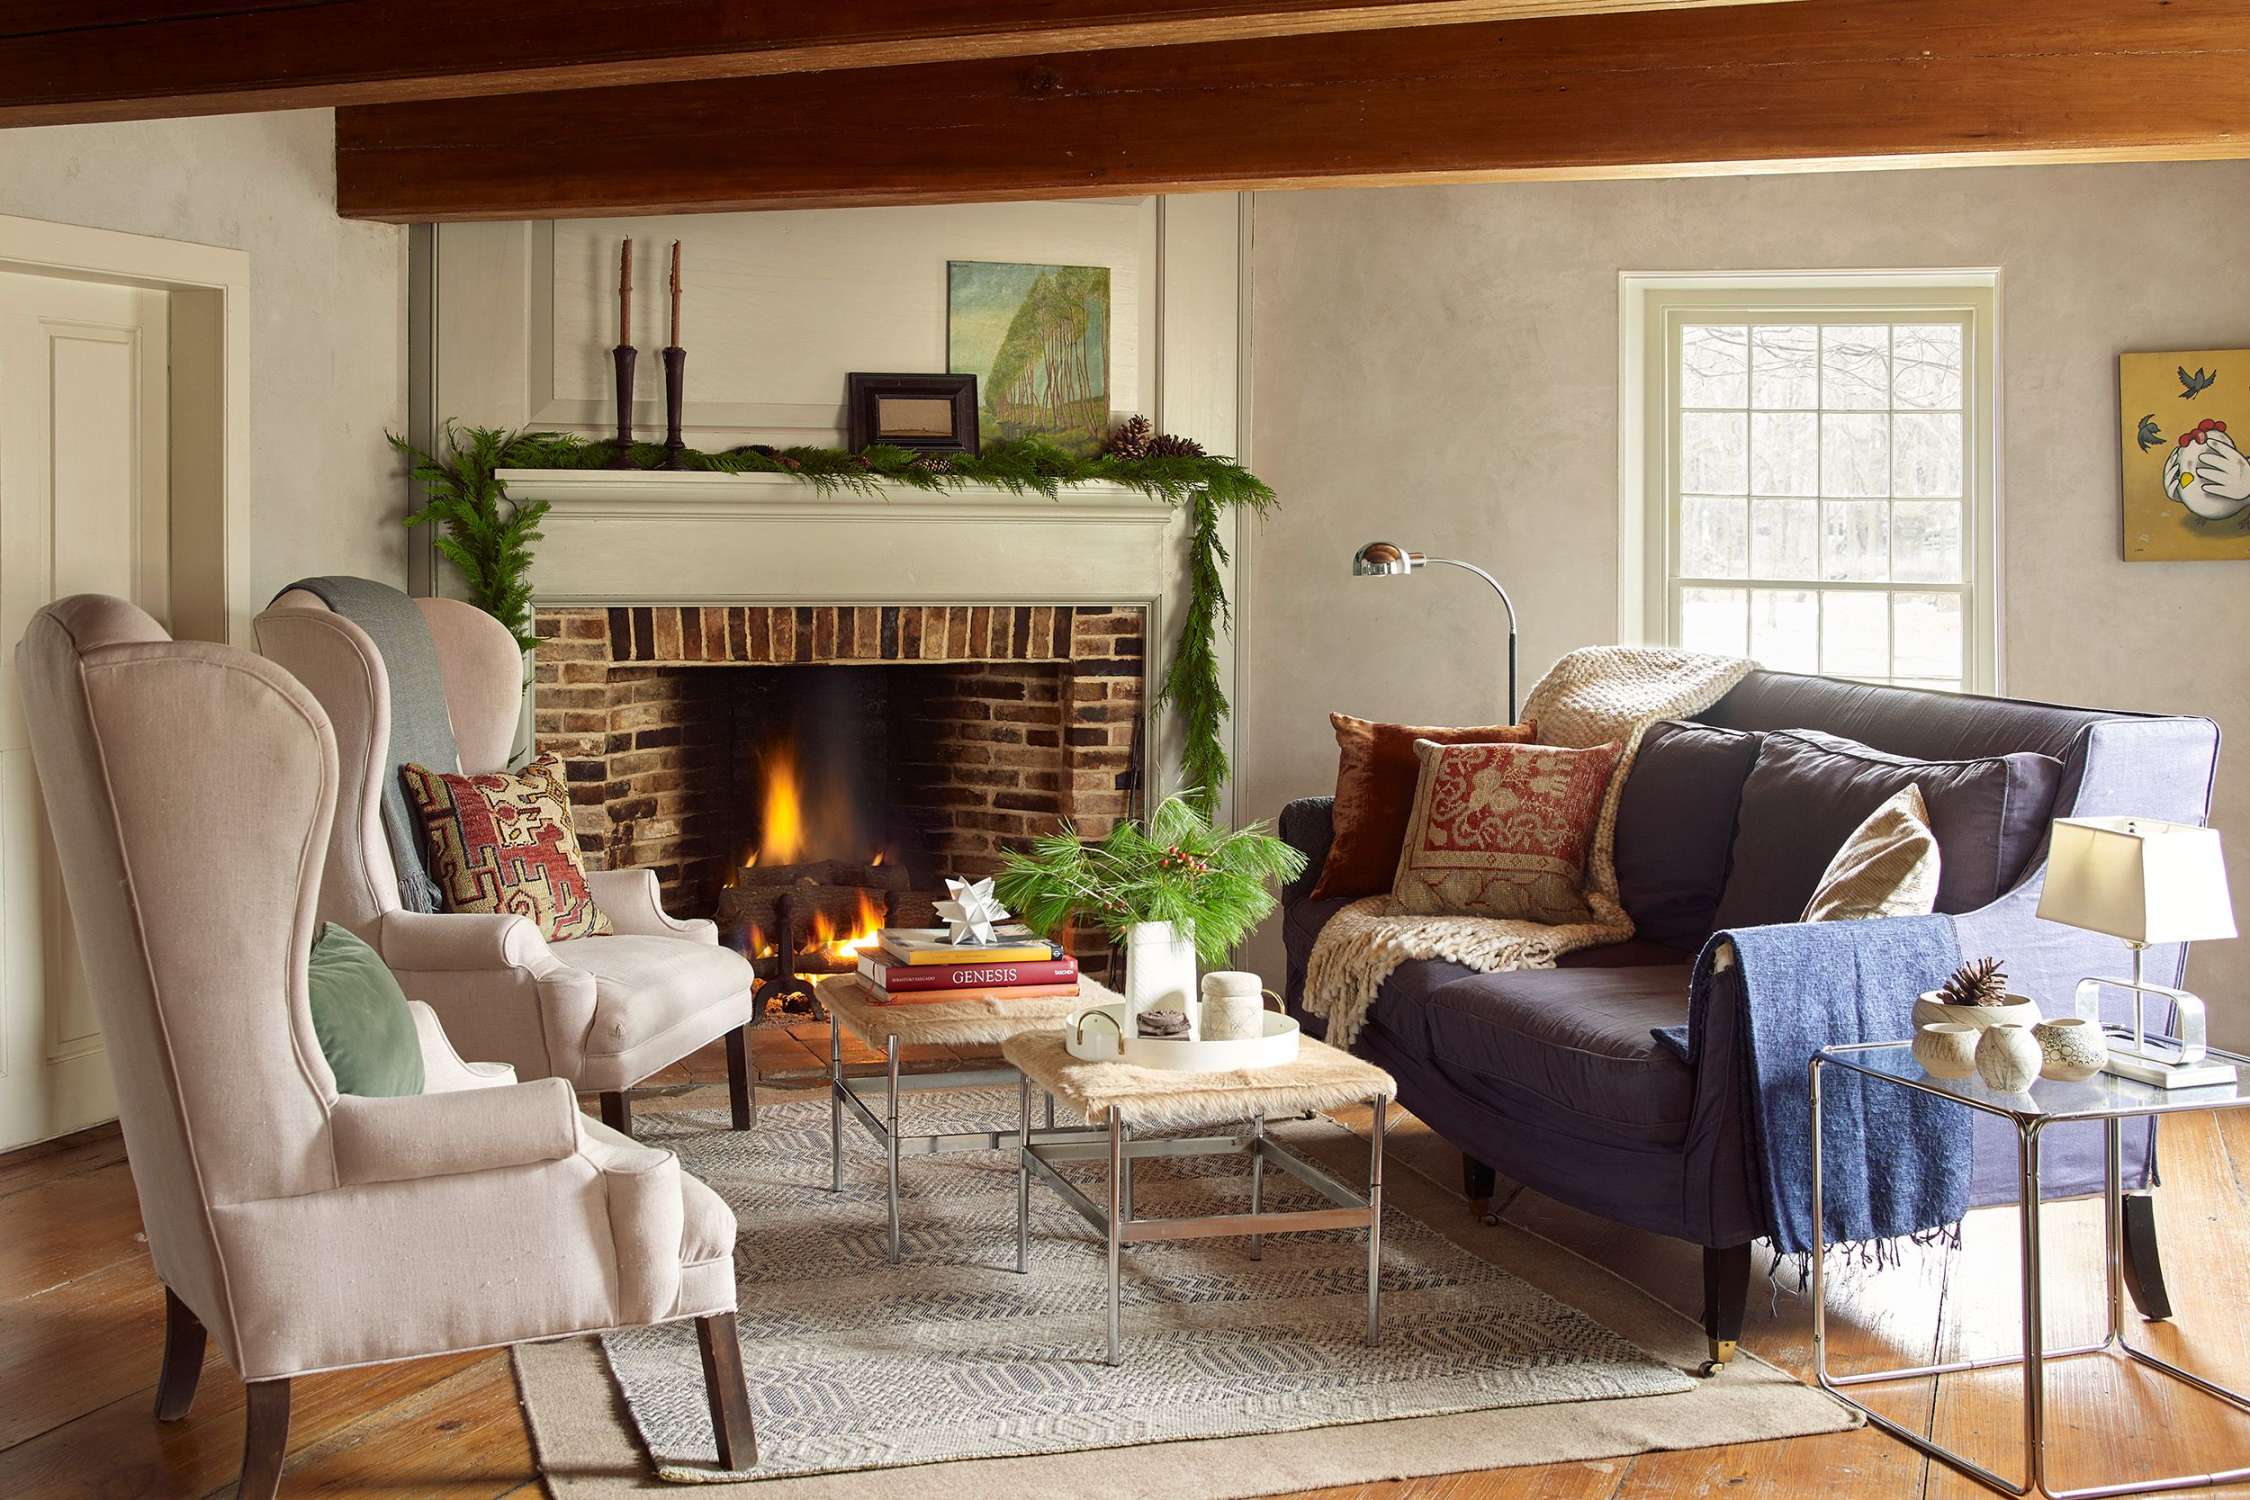 Our Best Ideas for Corner Fireplaces